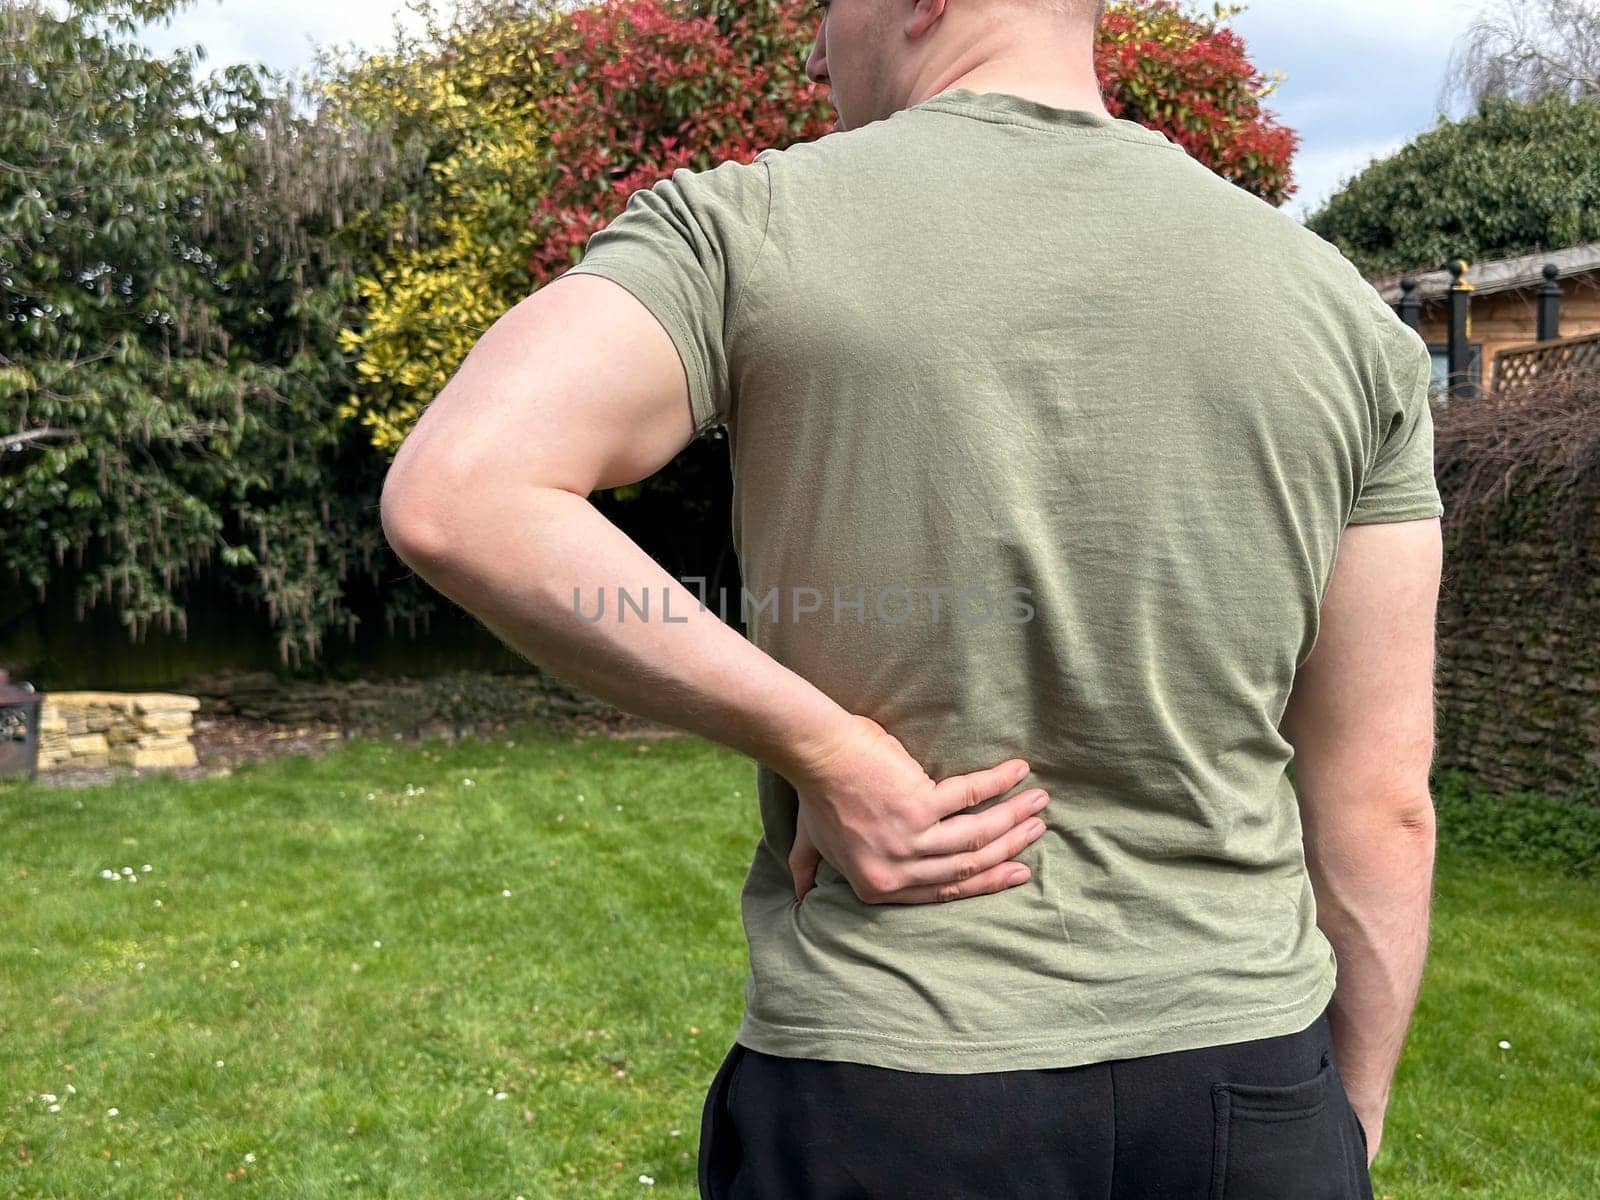 Cropped rear view shot of a man rubbing his lower back, having back pain